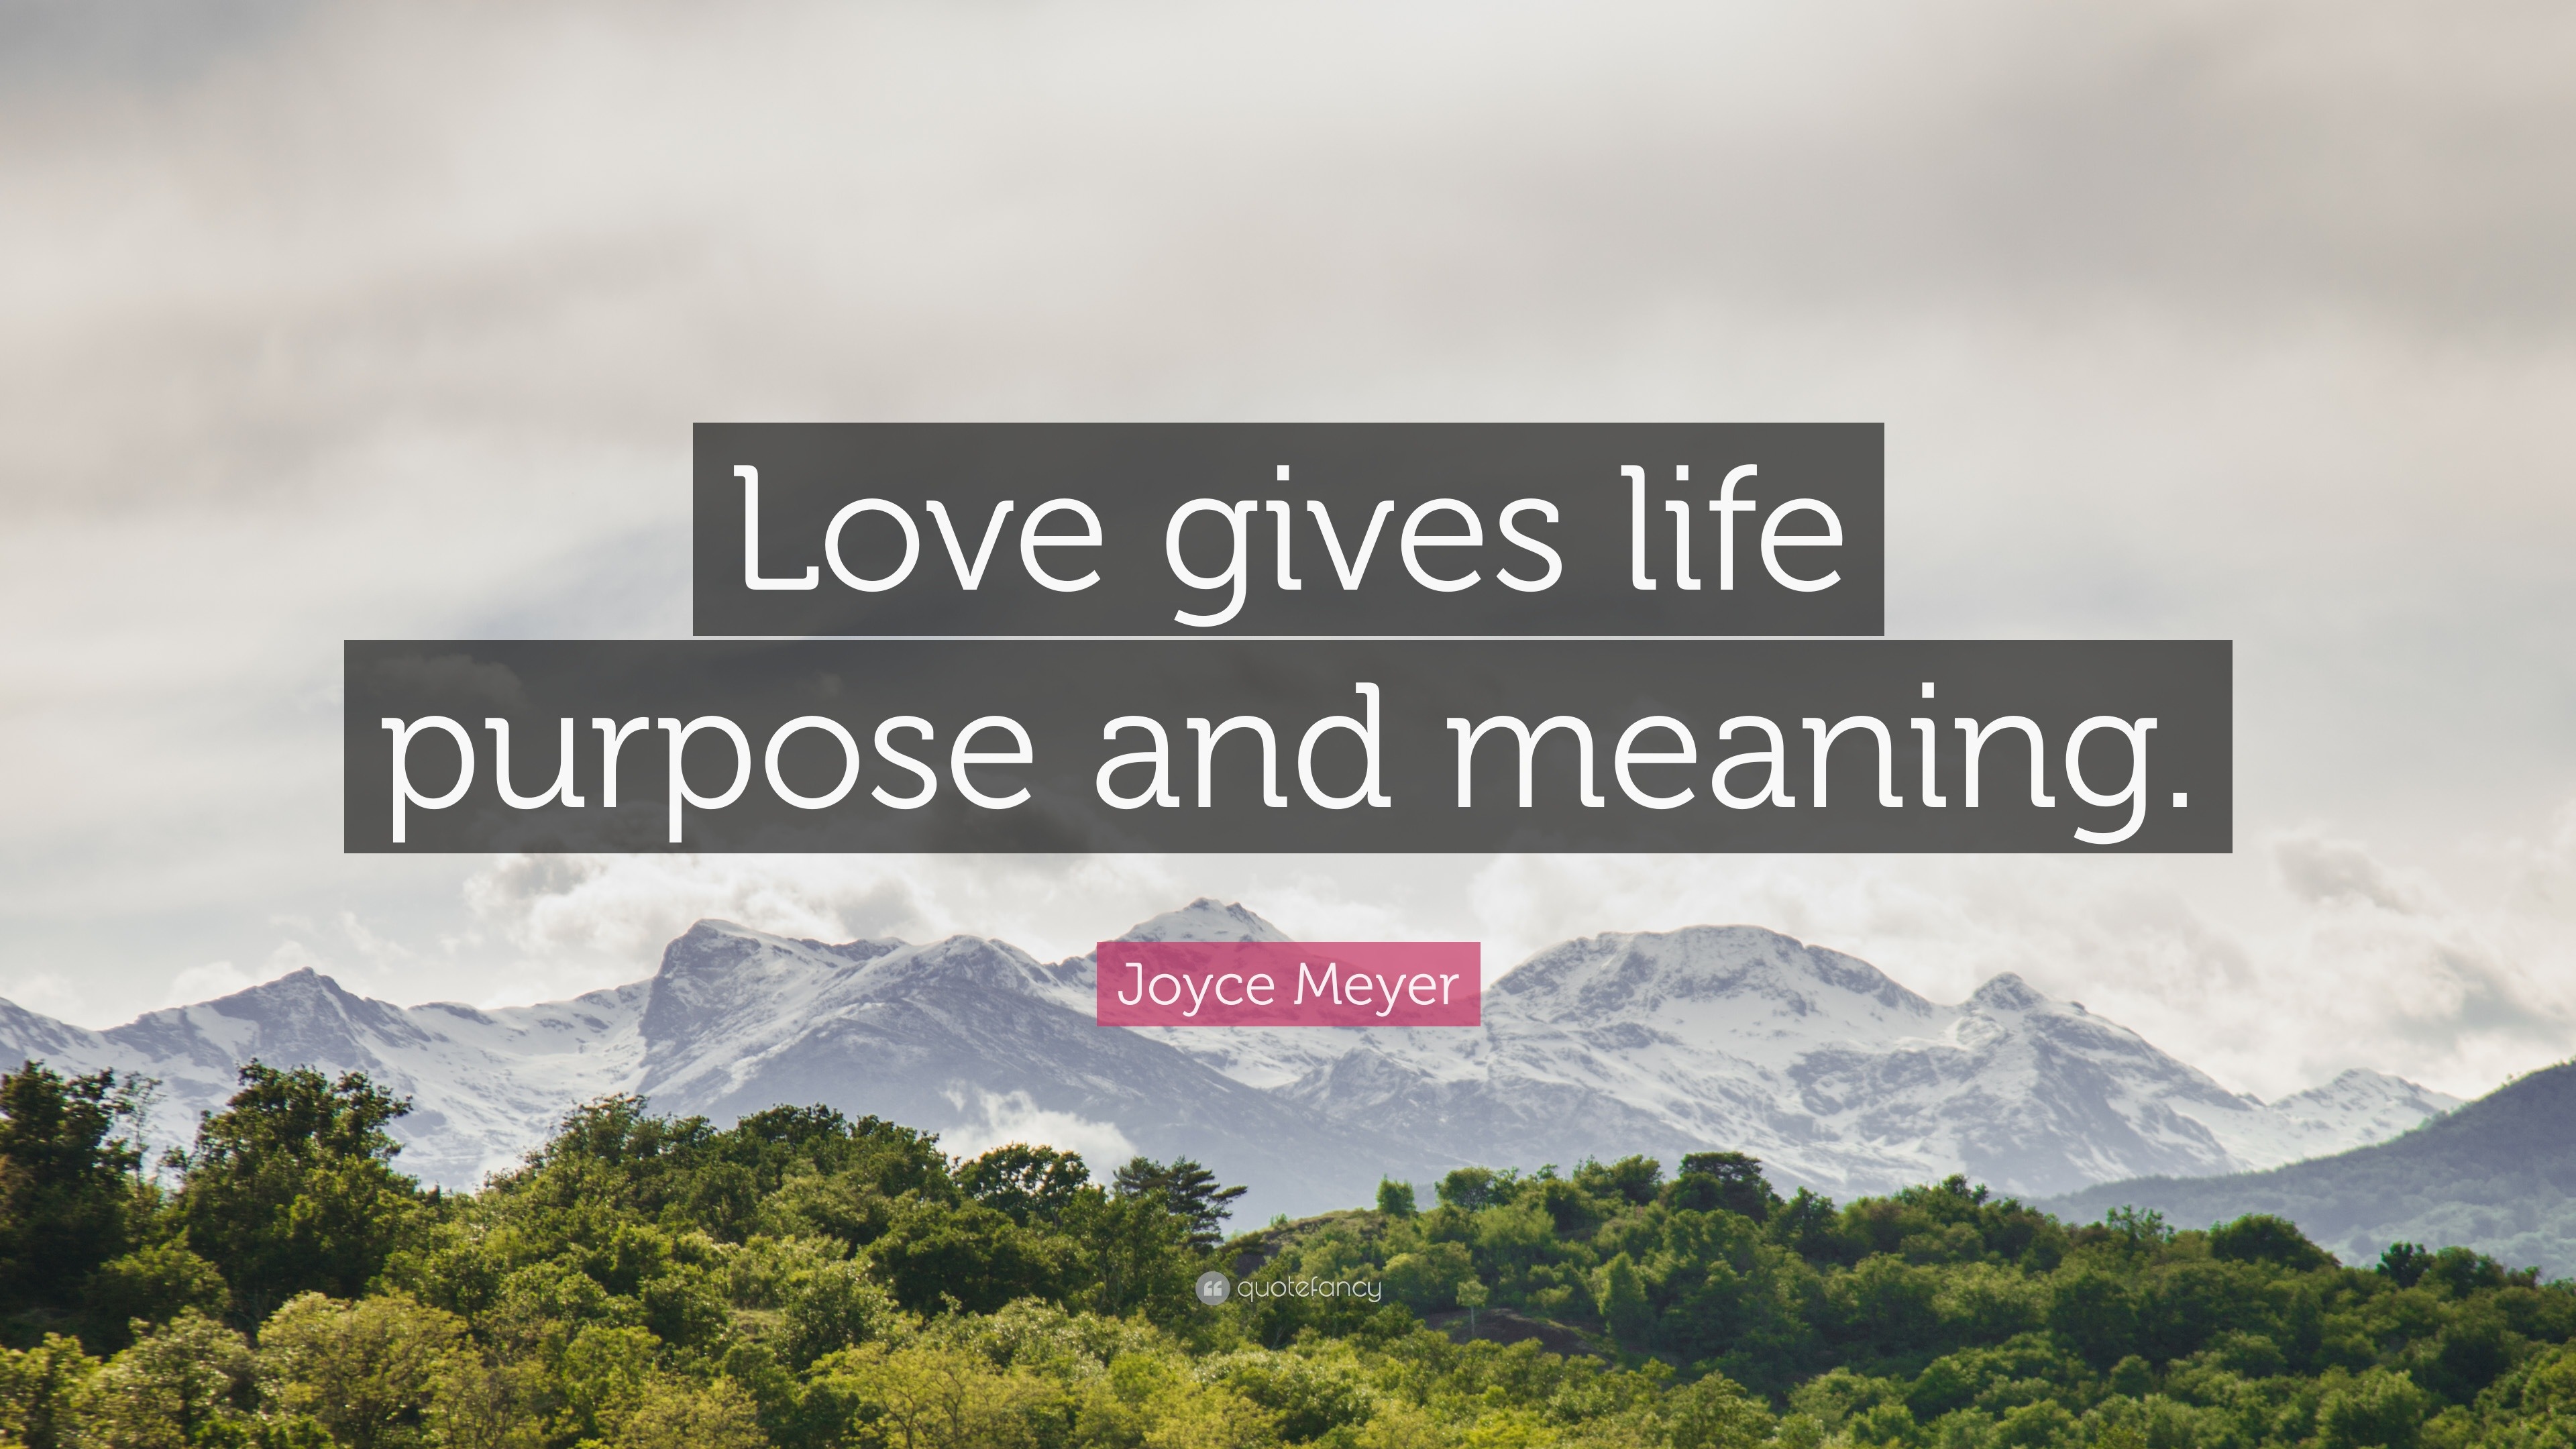 Joyce Meyer Quote “Love gives life purpose and meaning ”